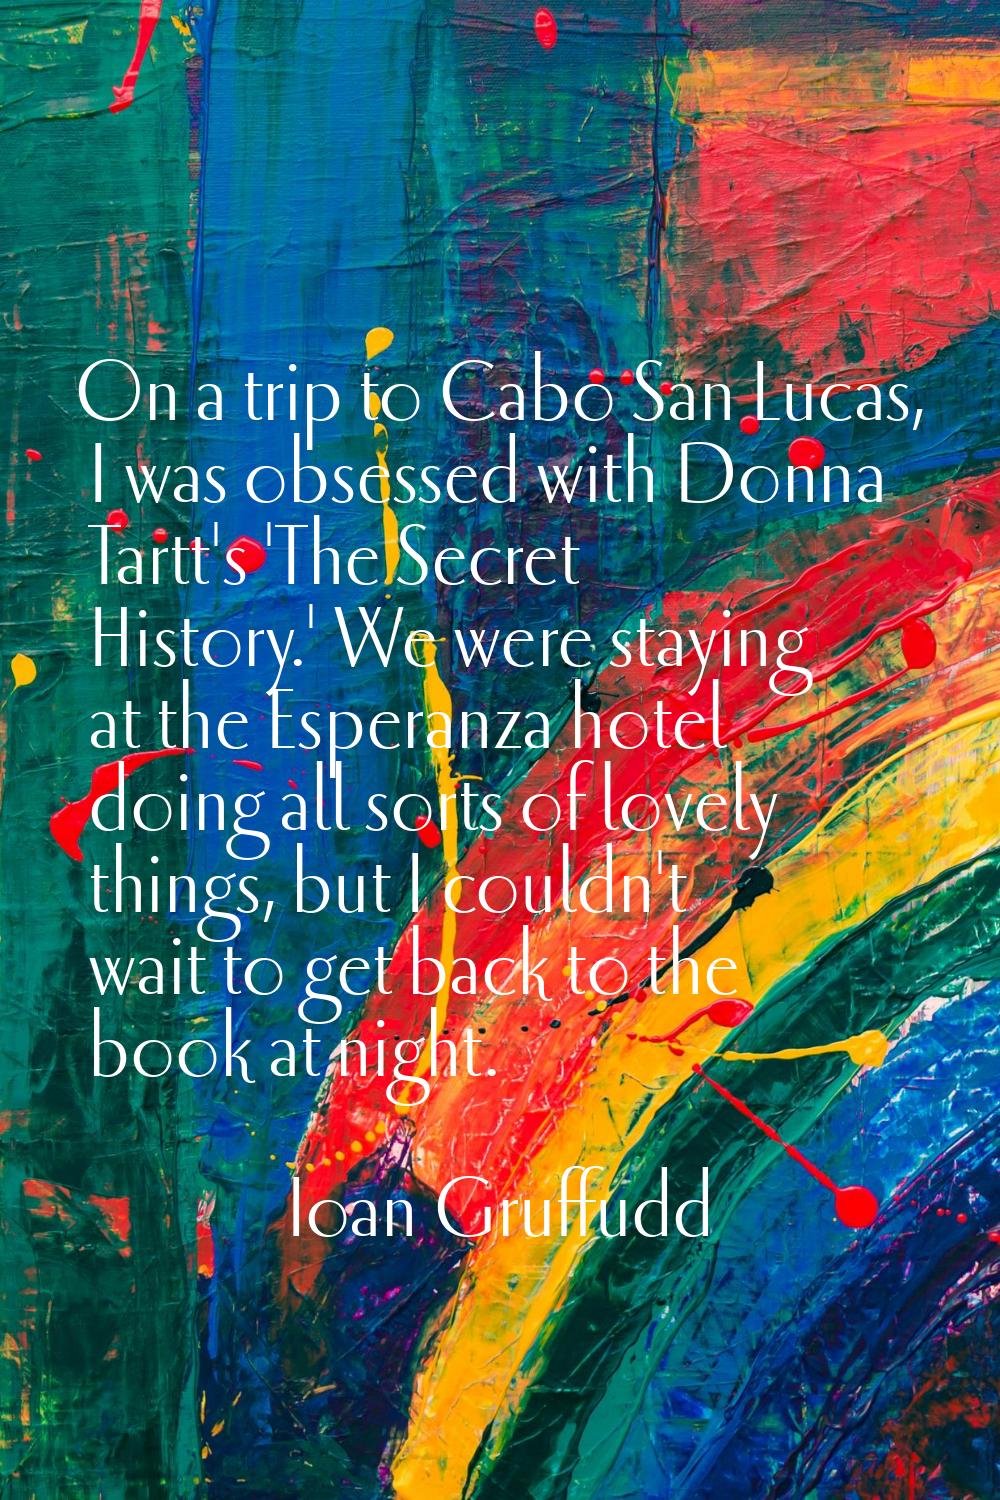 On a trip to Cabo San Lucas, I was obsessed with Donna Tartt's 'The Secret History.' We were stayin